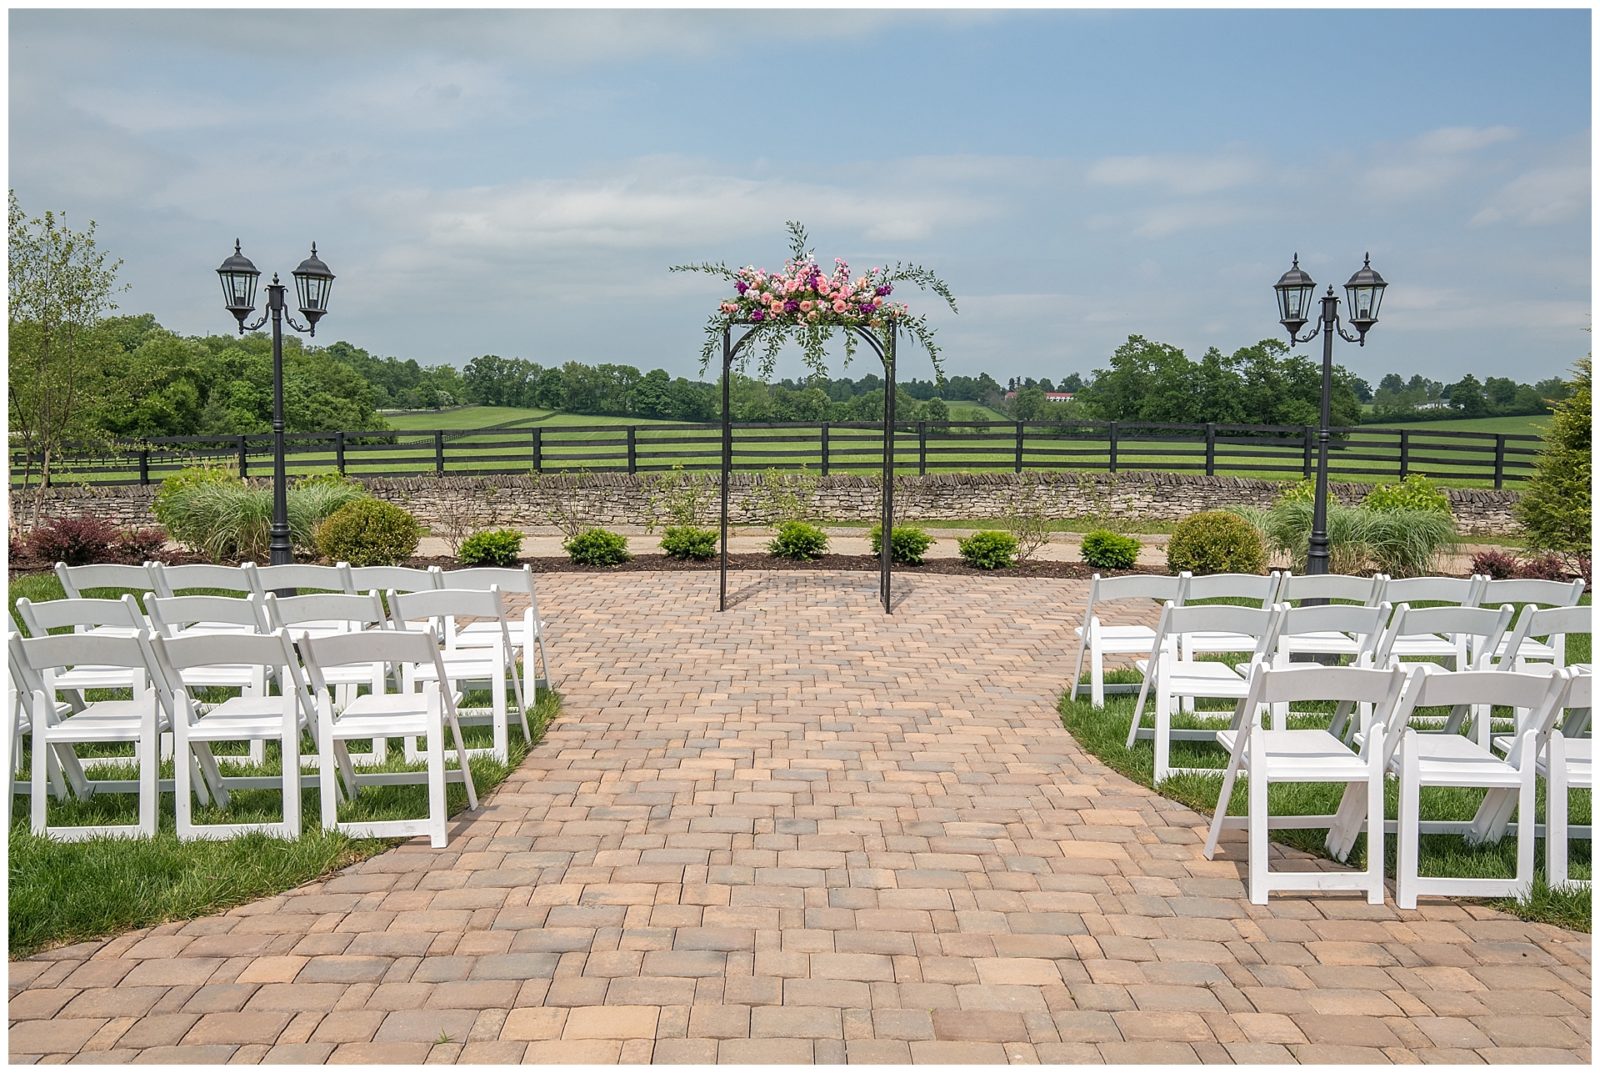 The Thoroughbred Center unveils a new outdoor wedding venue in Lexington, Kentucky called The Paddock. Get married in the heart of horse country. Photos by: Kevin and Anna Photography www.kevinandannaweddings.com